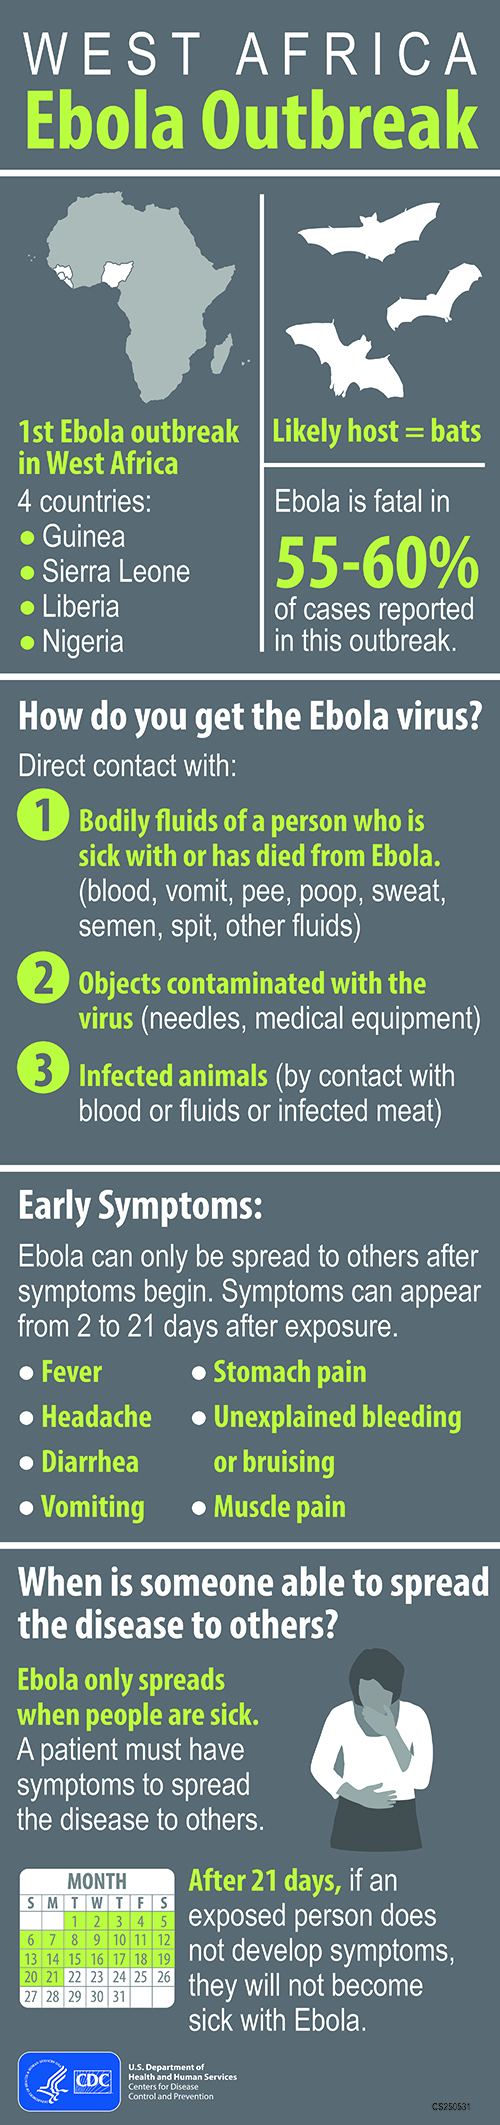 ebola facts infographic